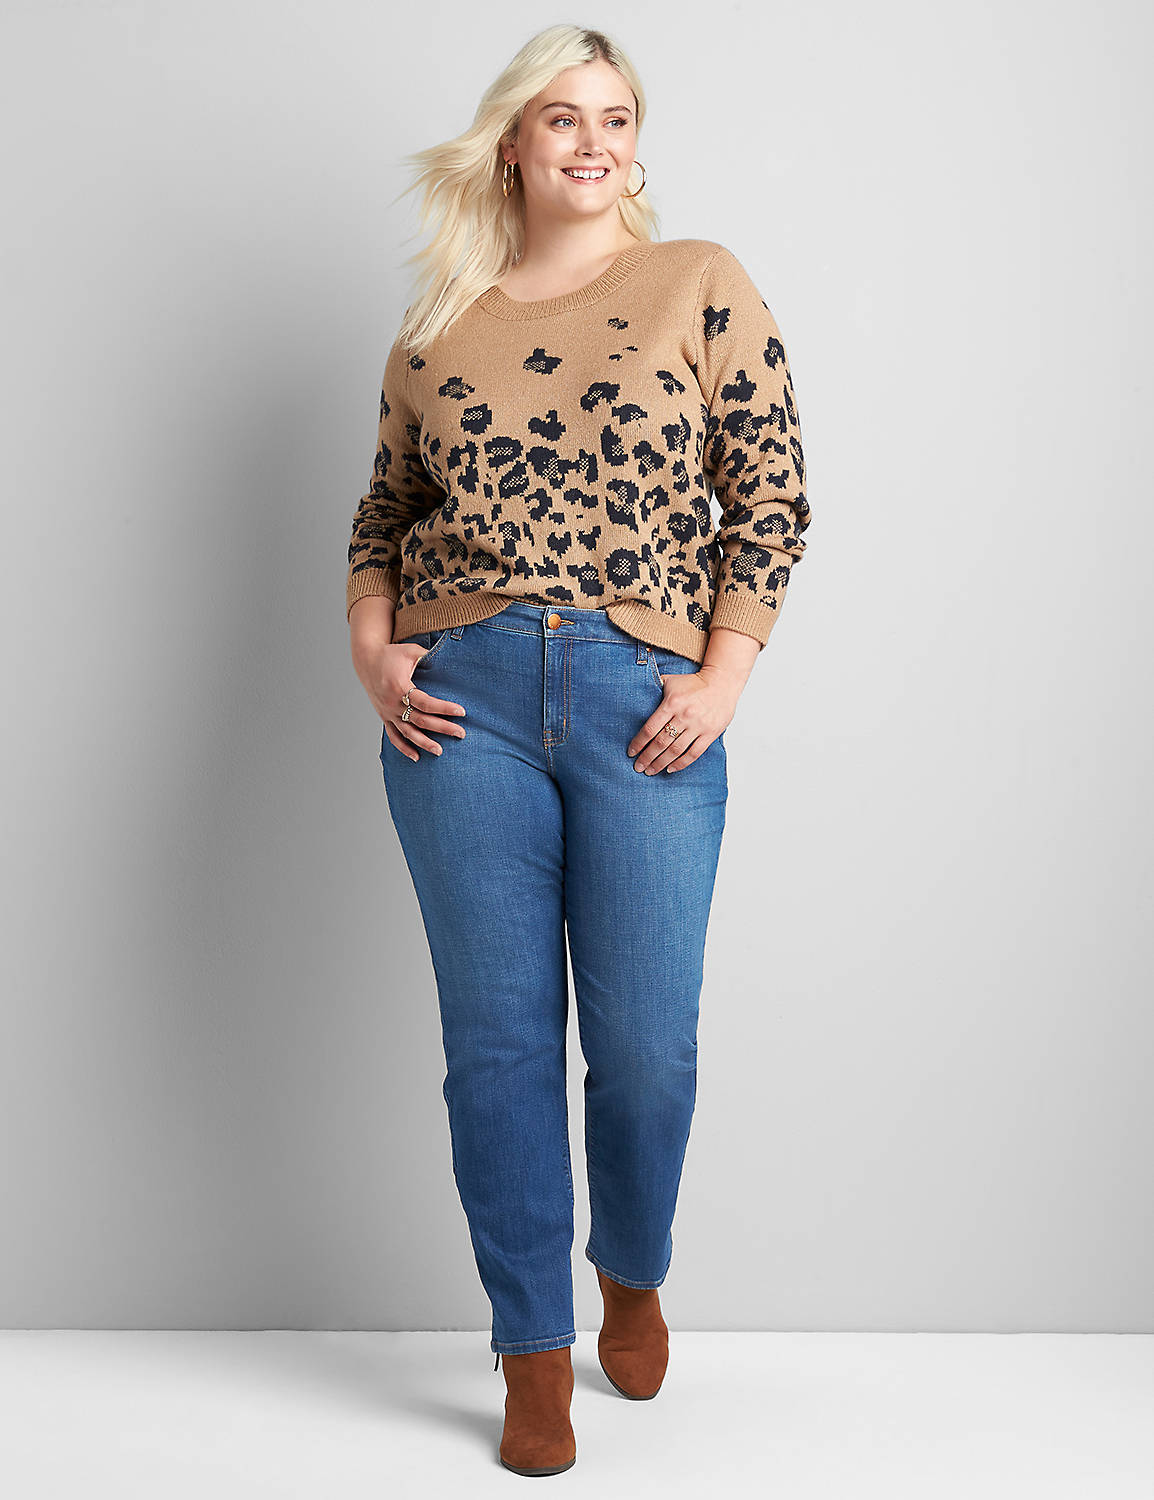 Cropped Leopard Sweater Product Image 3